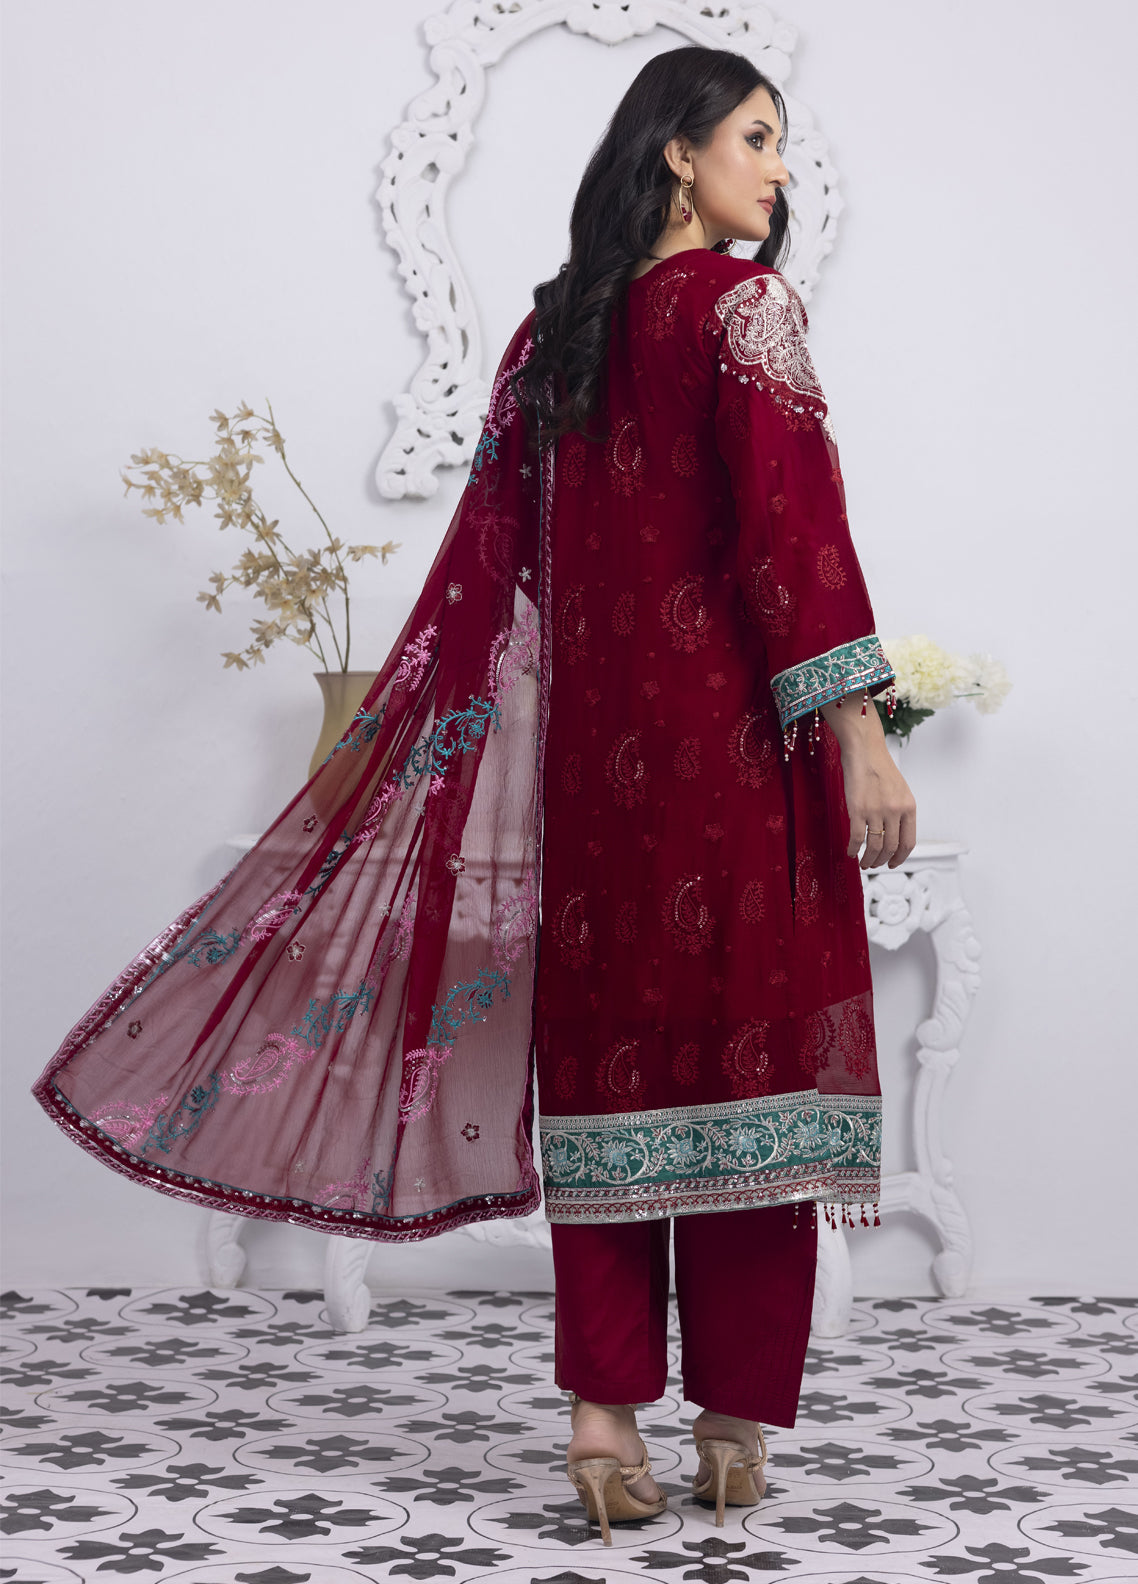 Mansoob By Polawn Embroidered Stitched 3 Piece Chiffon Suit PD-23-101 Ready to Wear